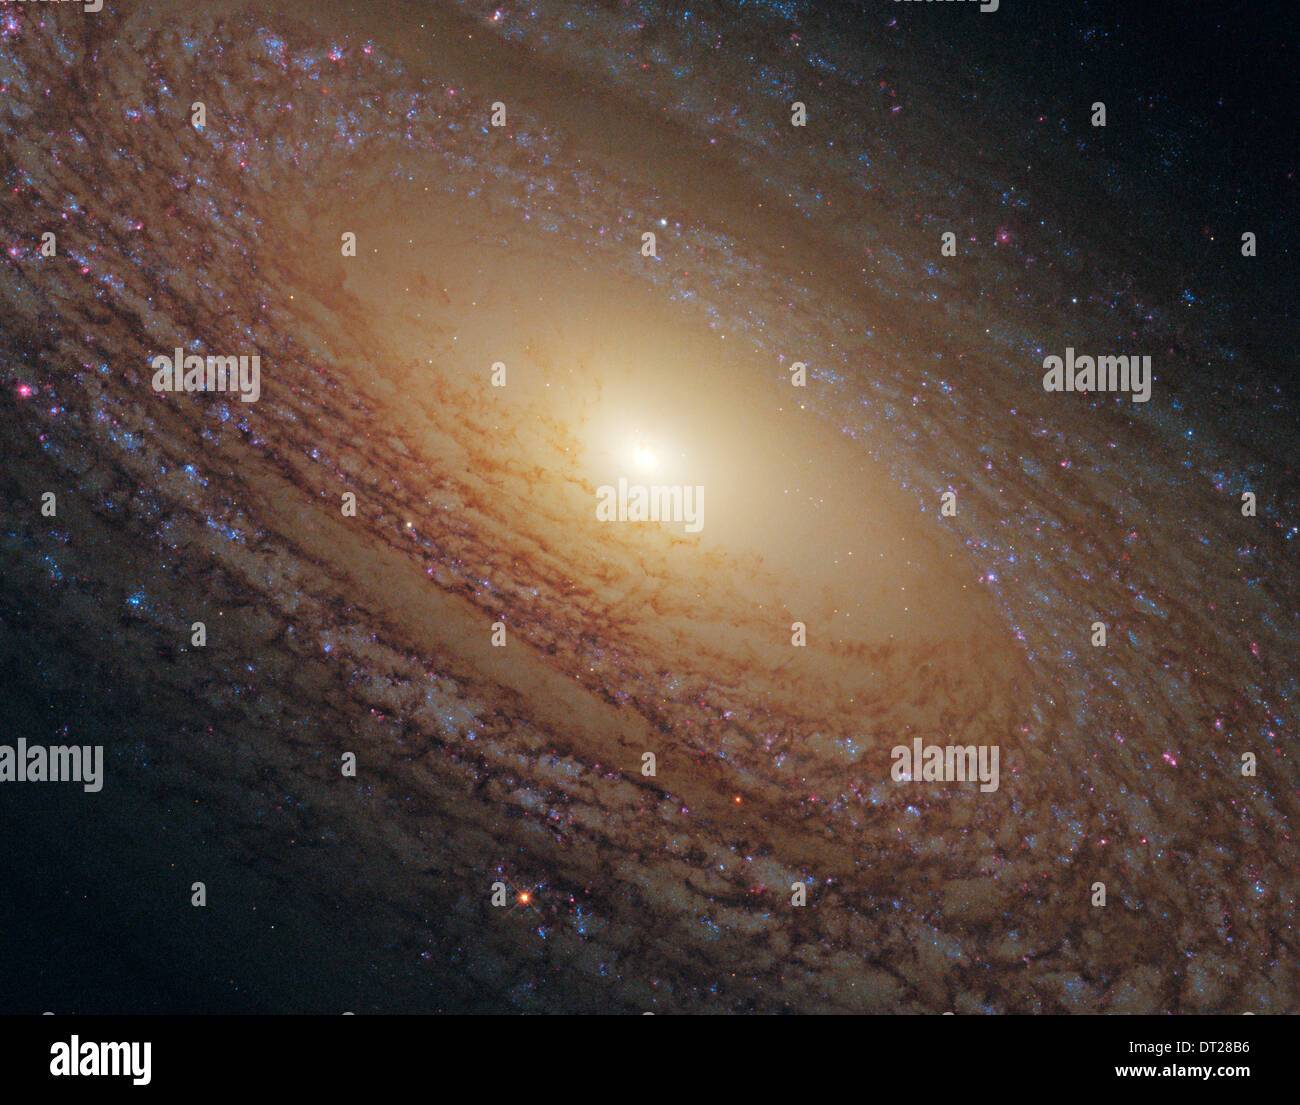 Galaxie spirale NGC 2841 Banque D'Images